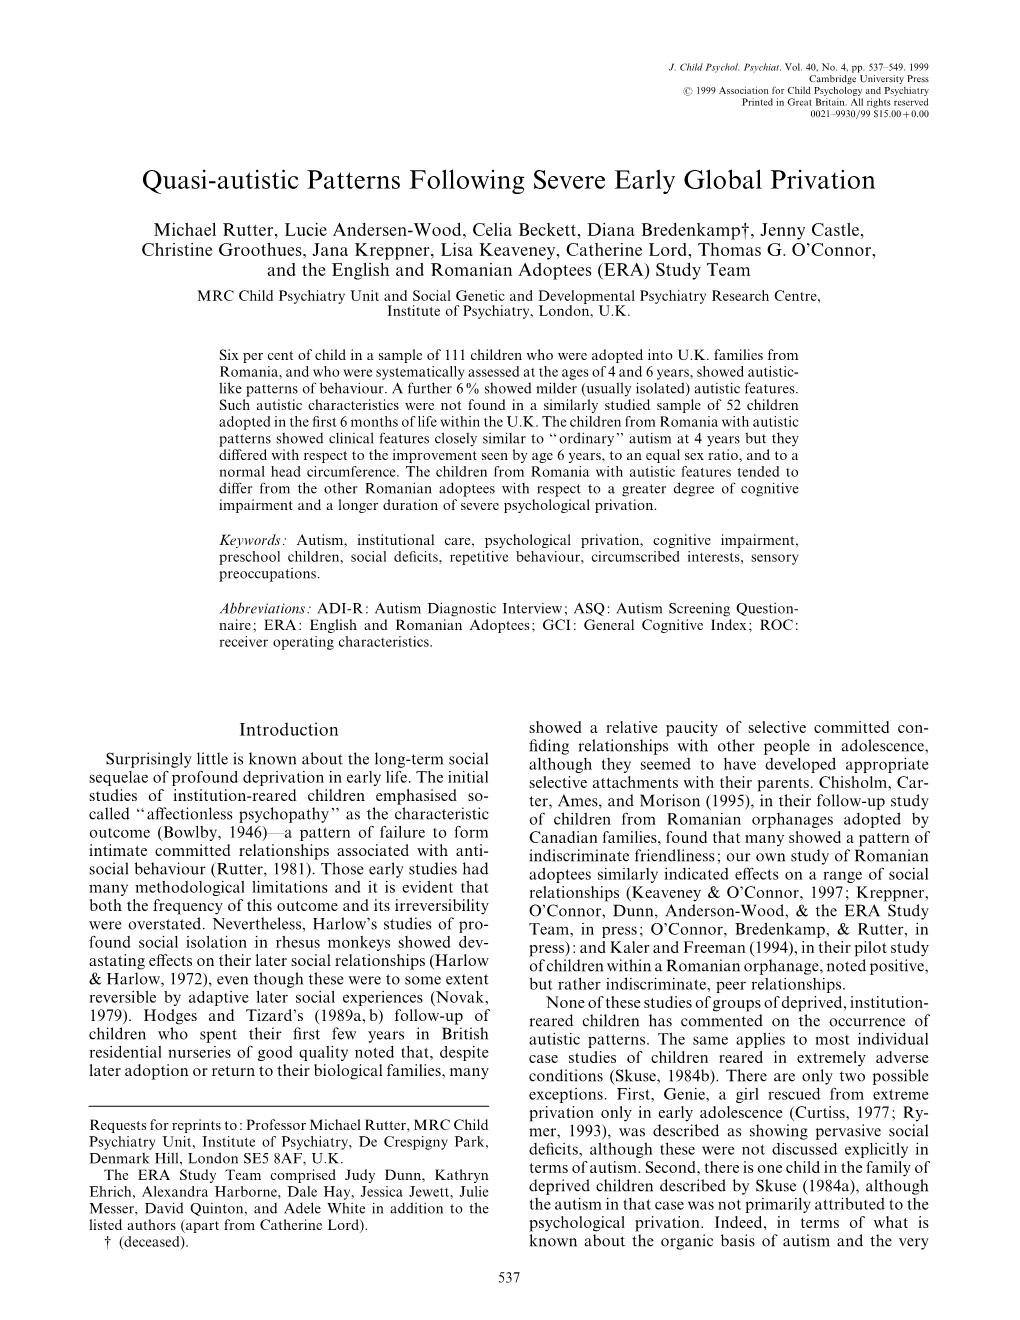 Quasi-Autistic Patterns Following Severe Early Global Privation